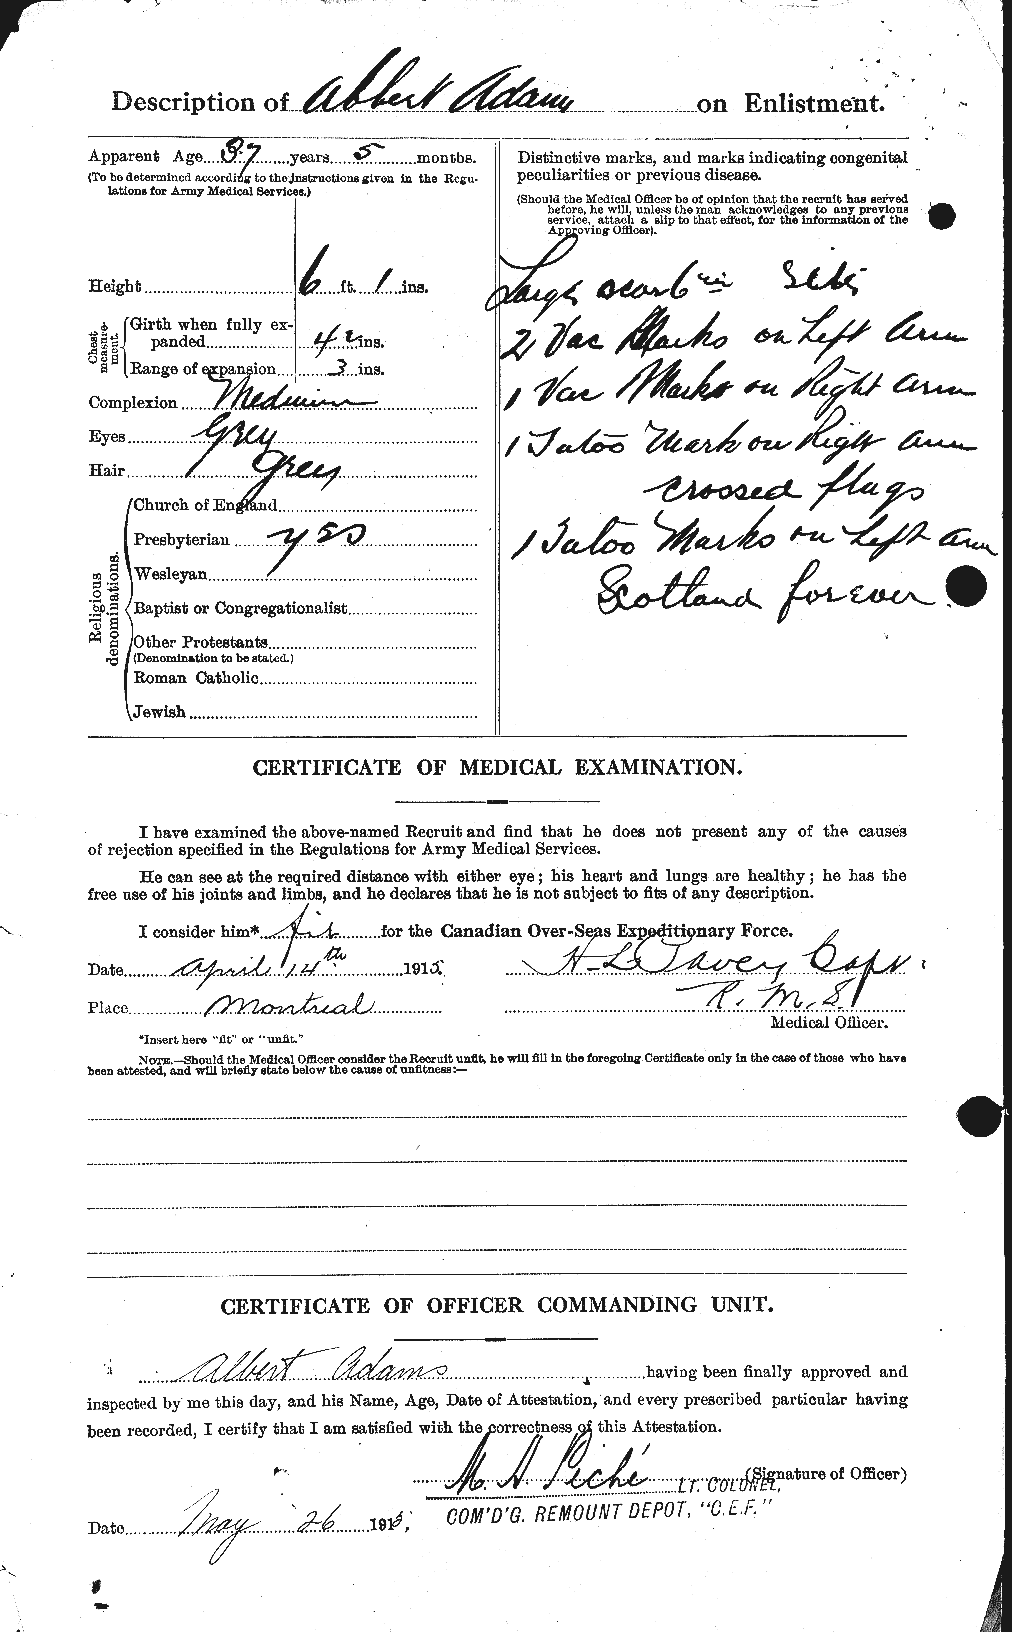 Personnel Records of the First World War - CEF 690898b